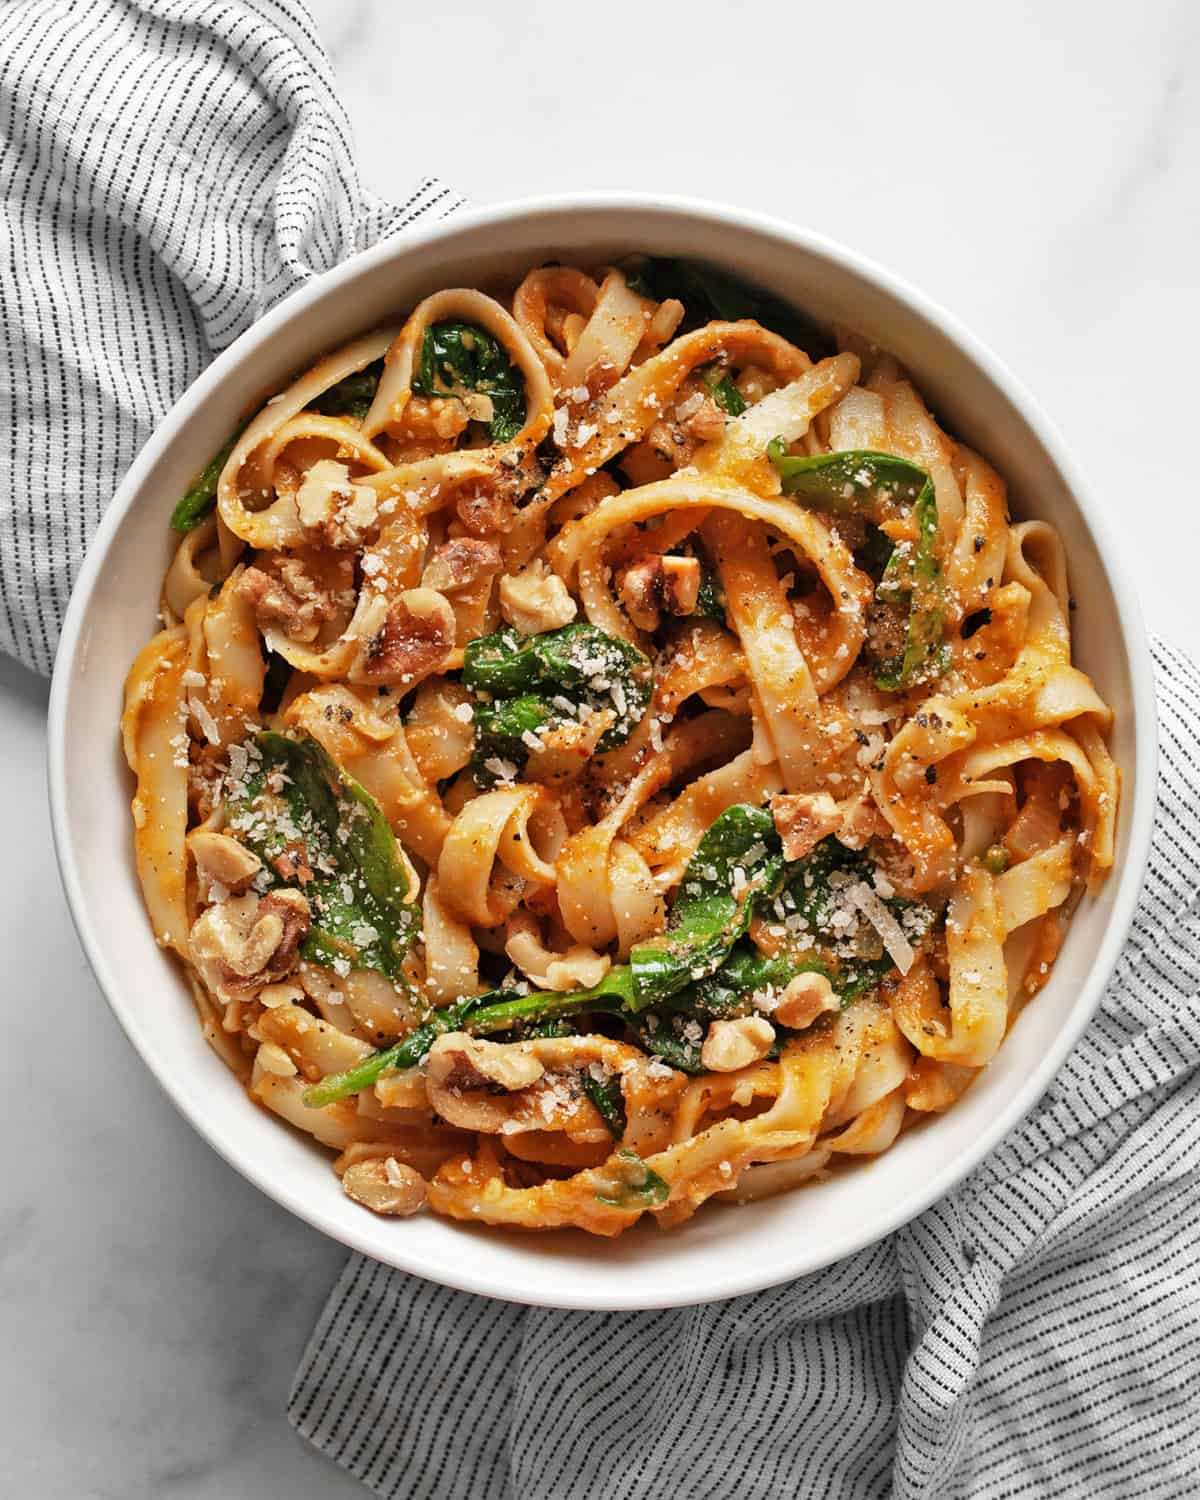 Pumpkin pasta with spinach on a plate.